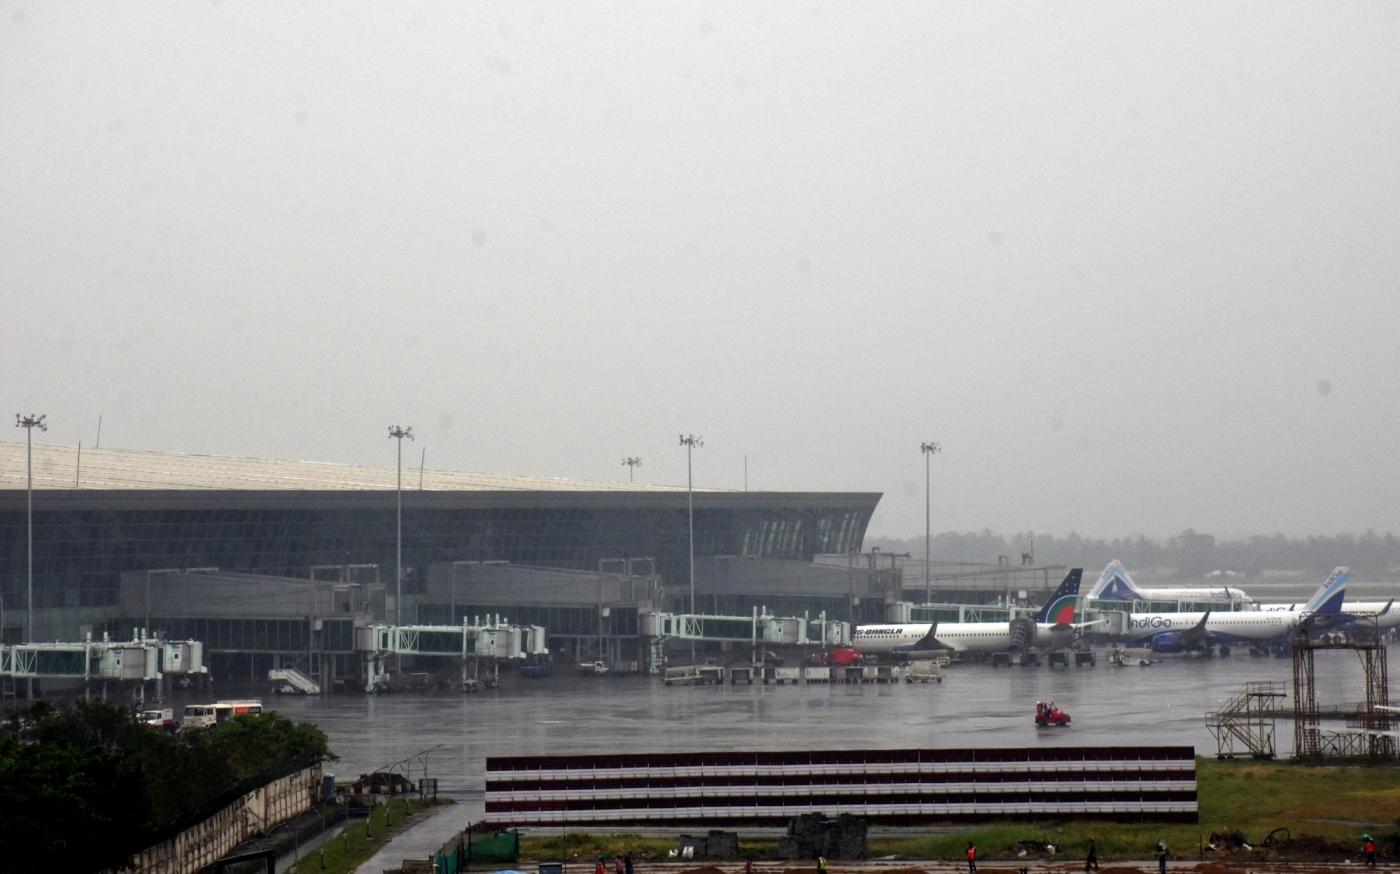 Kolkata: A view of Netaji Subhash Chandra Bose International Airport (NSCBI) in the wake of cyclone Fani, on May 3, 2019. The cyclonic storm is currently situated at about 370 km southwest of Kolkata, is likely to enter West Bengal with a wind speed of 90-100 kmph gusting to 115 kmph by midnight to Saturday early morning. (Photo: Kuntal Chakrabarty/IANS) by .